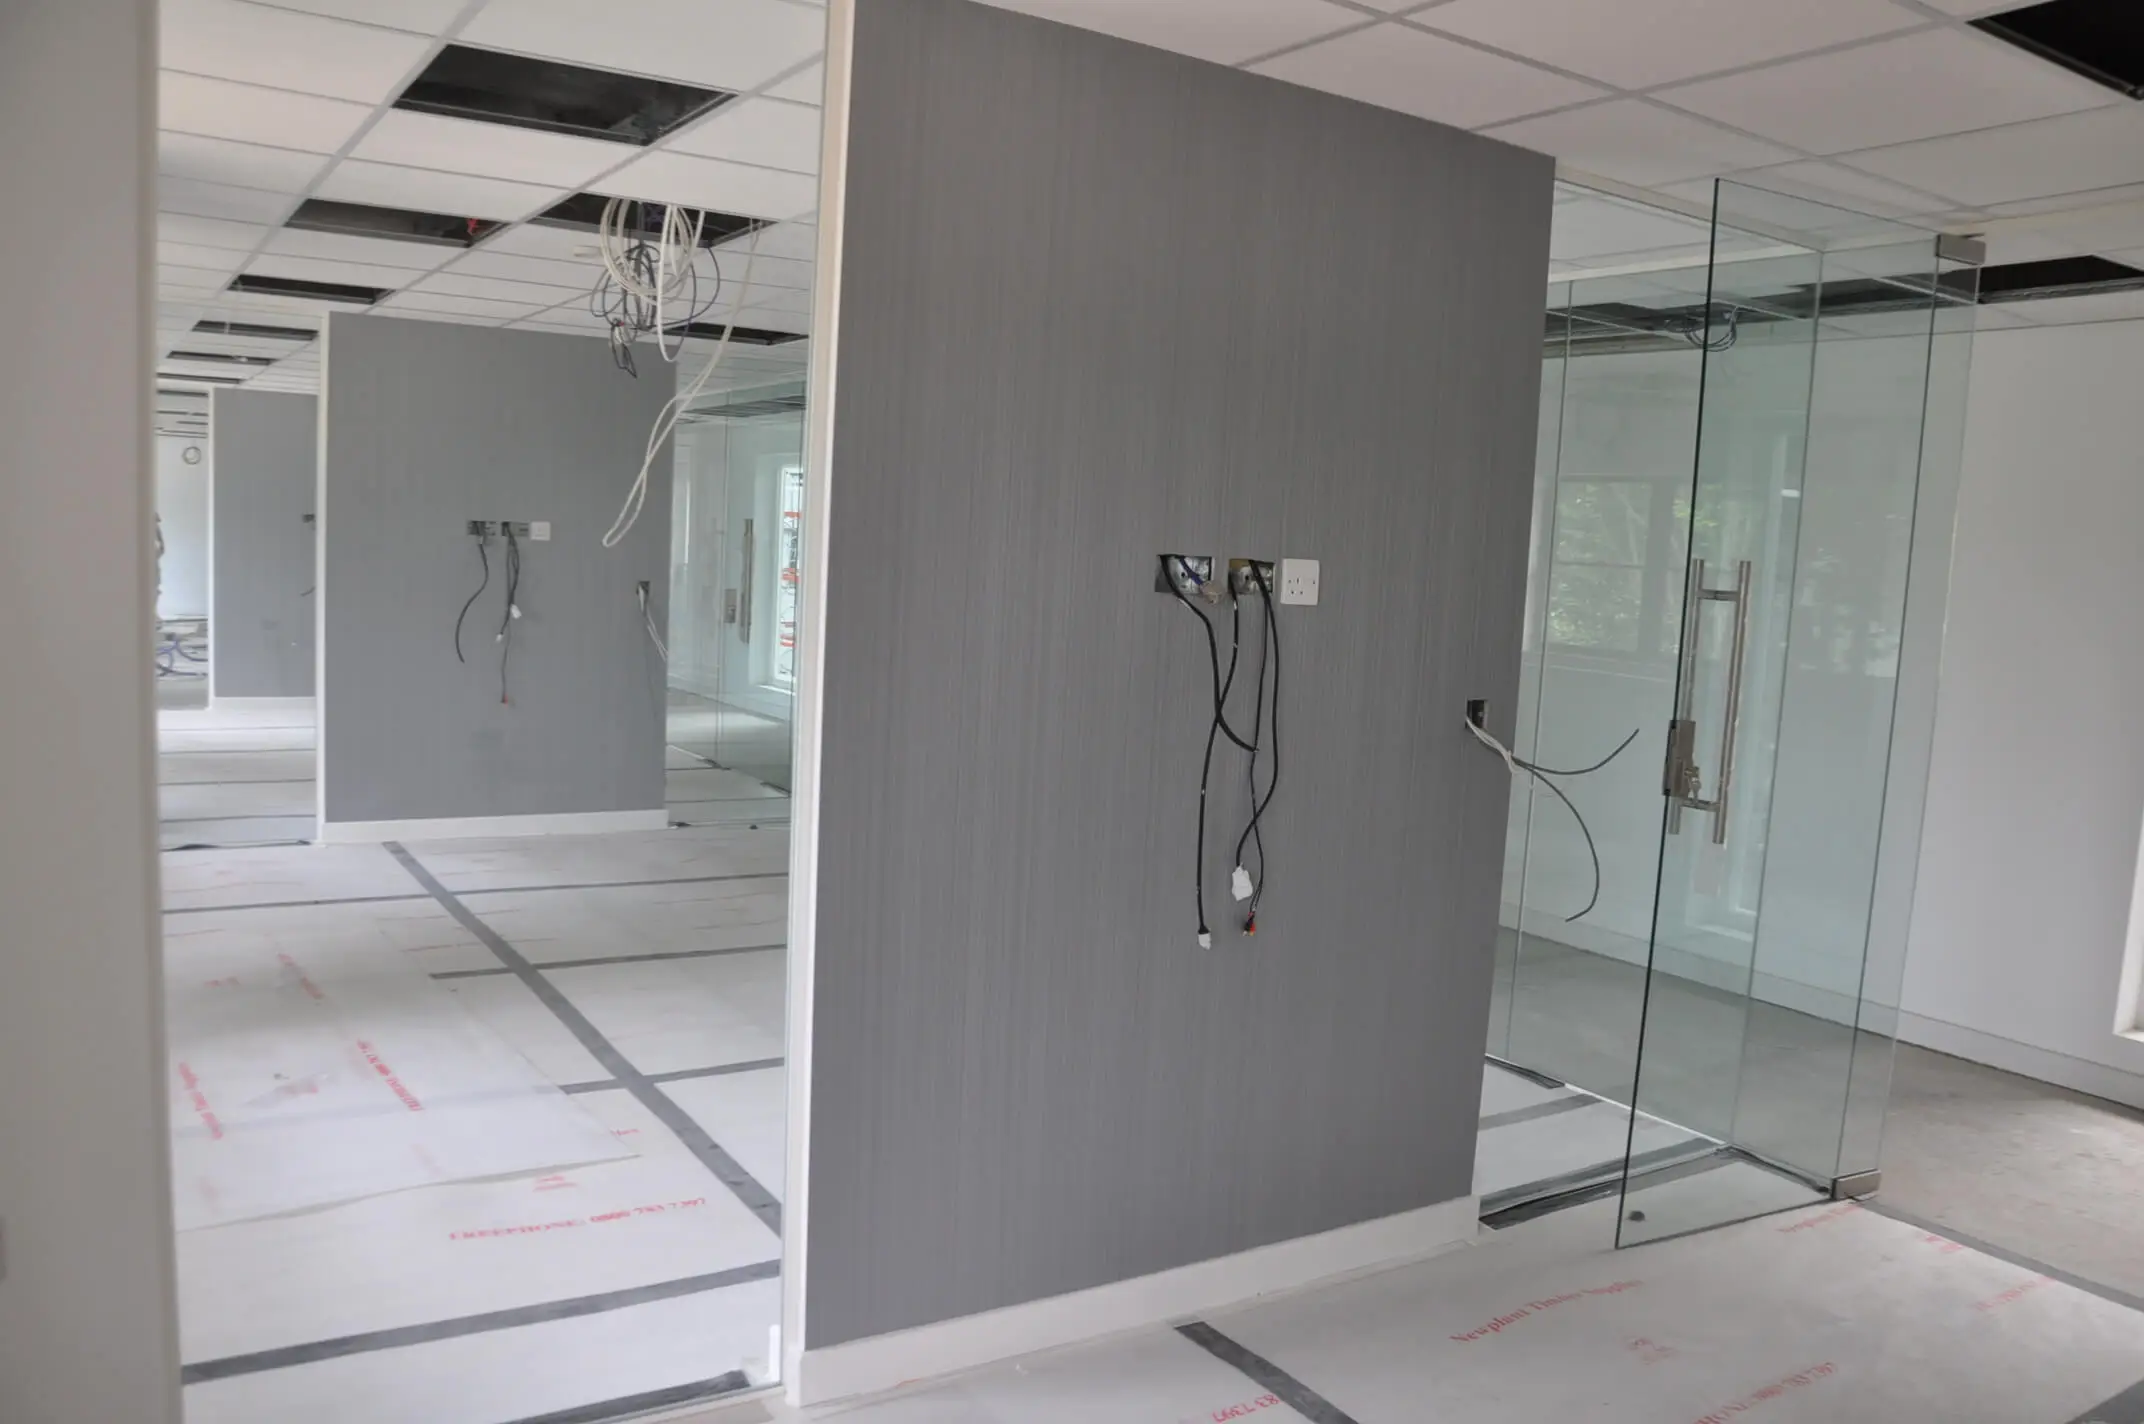 Work under construction of frameless glass partitioning